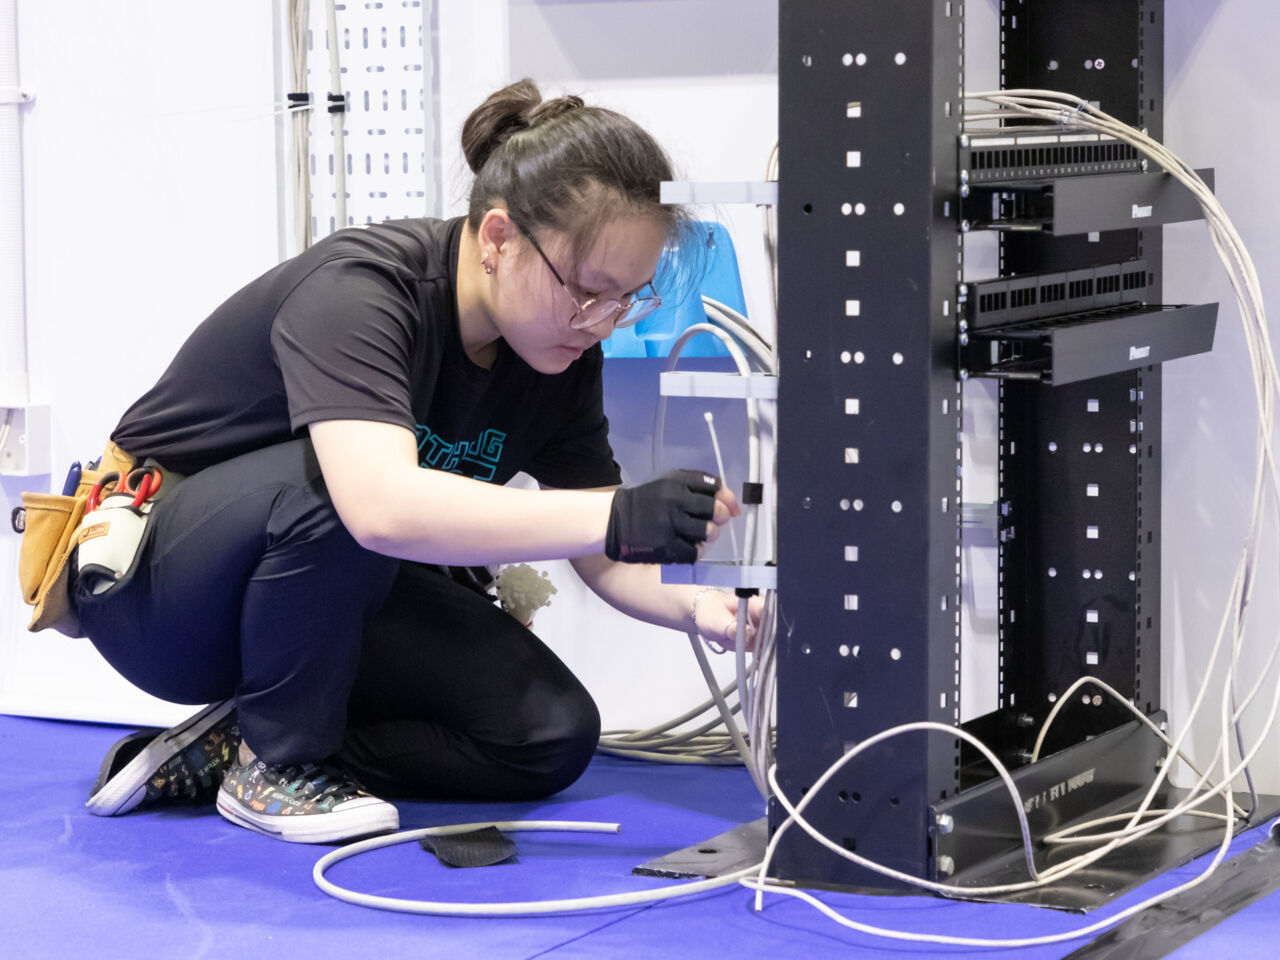 A Competitor in Information Network Cabling kneeling in front of cable casing holding wires during the WorldSkills ASEAN 2023 Competition held in Singapore in July 2023.